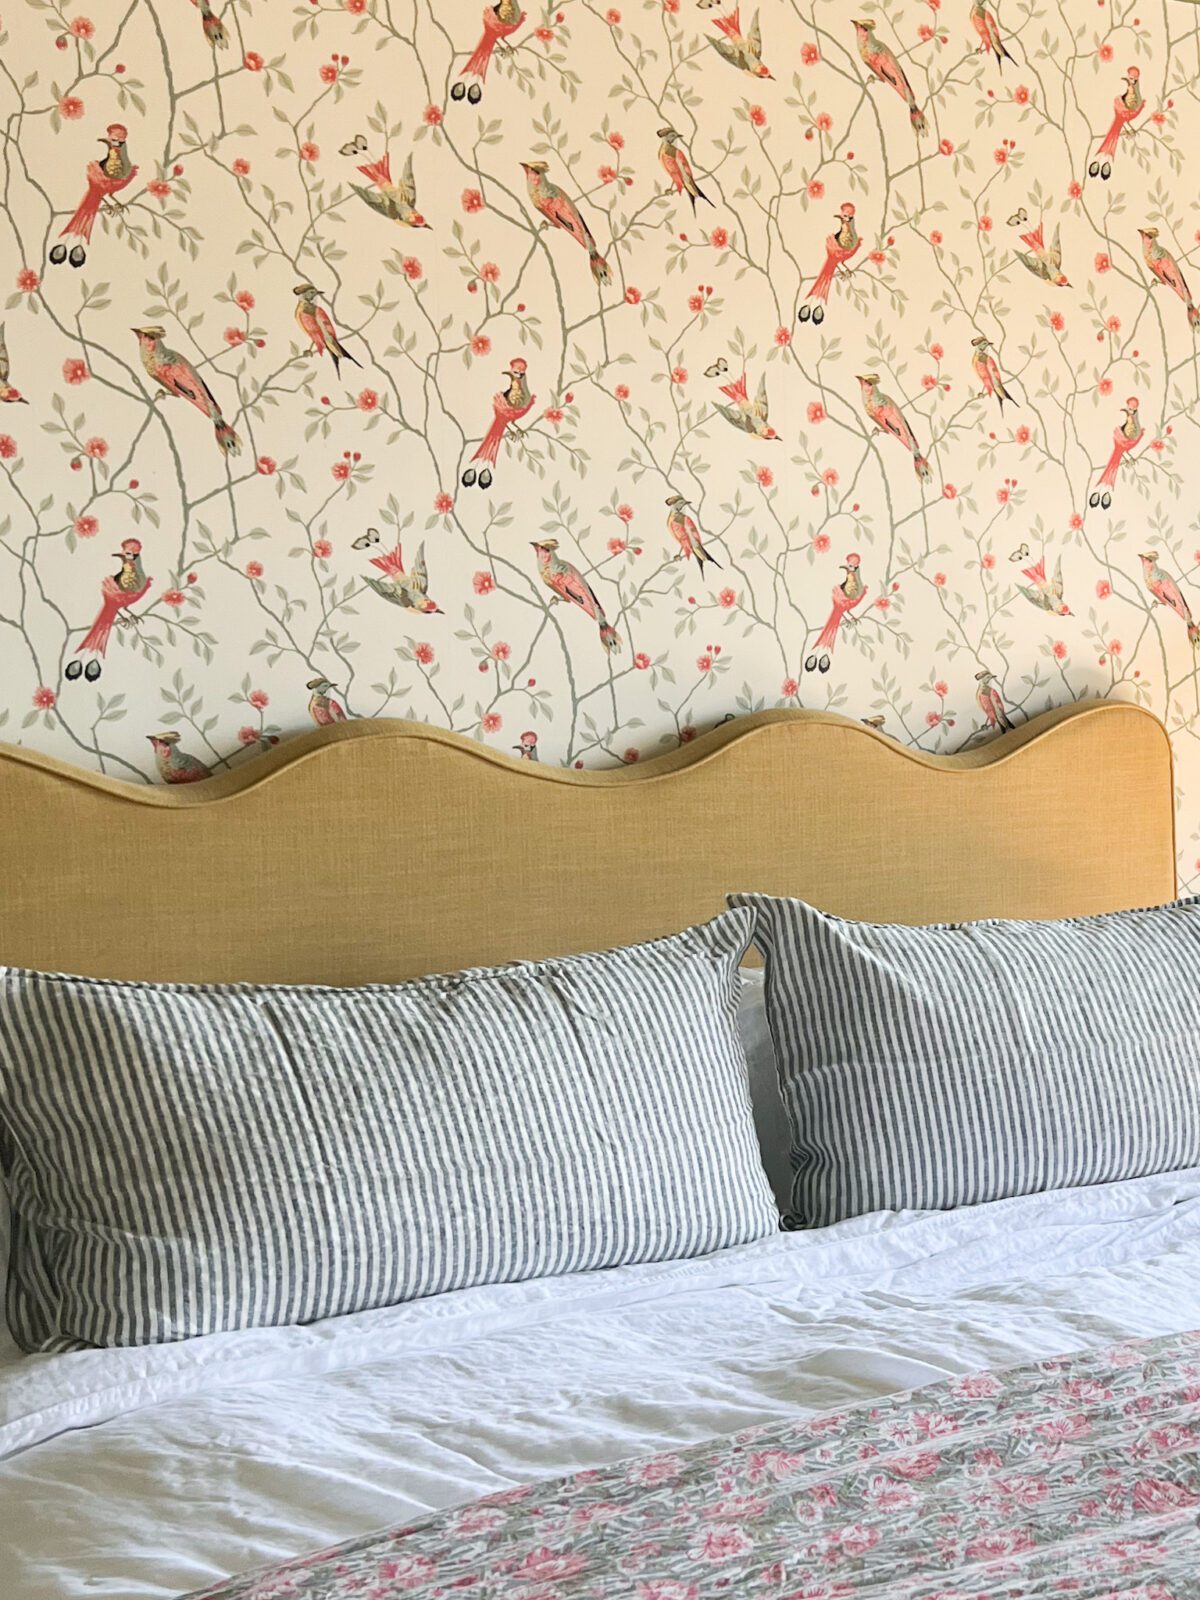 Close up view of bed pillows. The wallpaper, pillowcase, and quilt are patterned